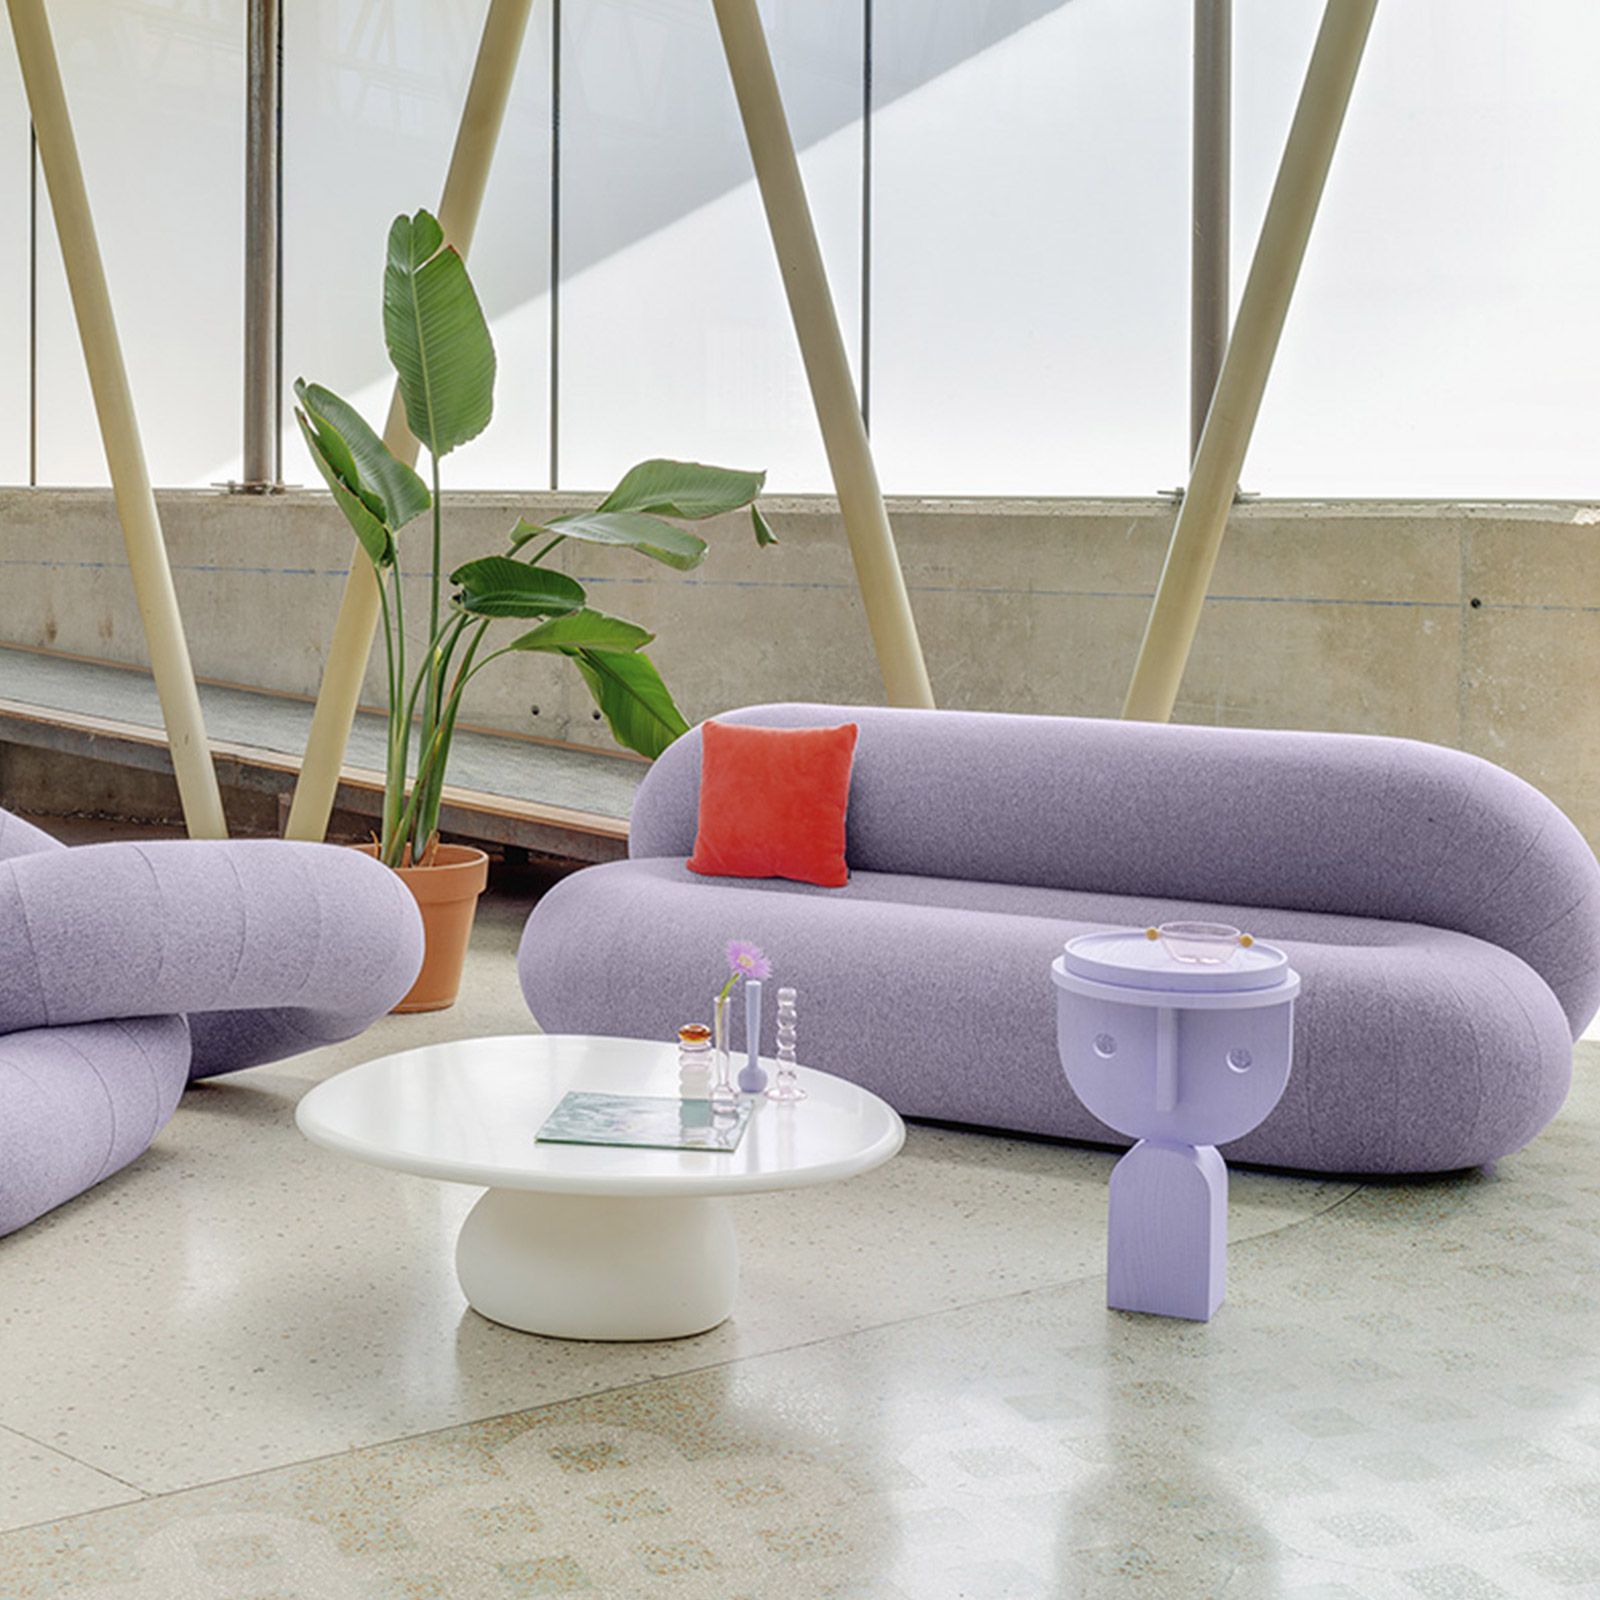 Bring out the youthfulness in your home
  by using a funky sofa